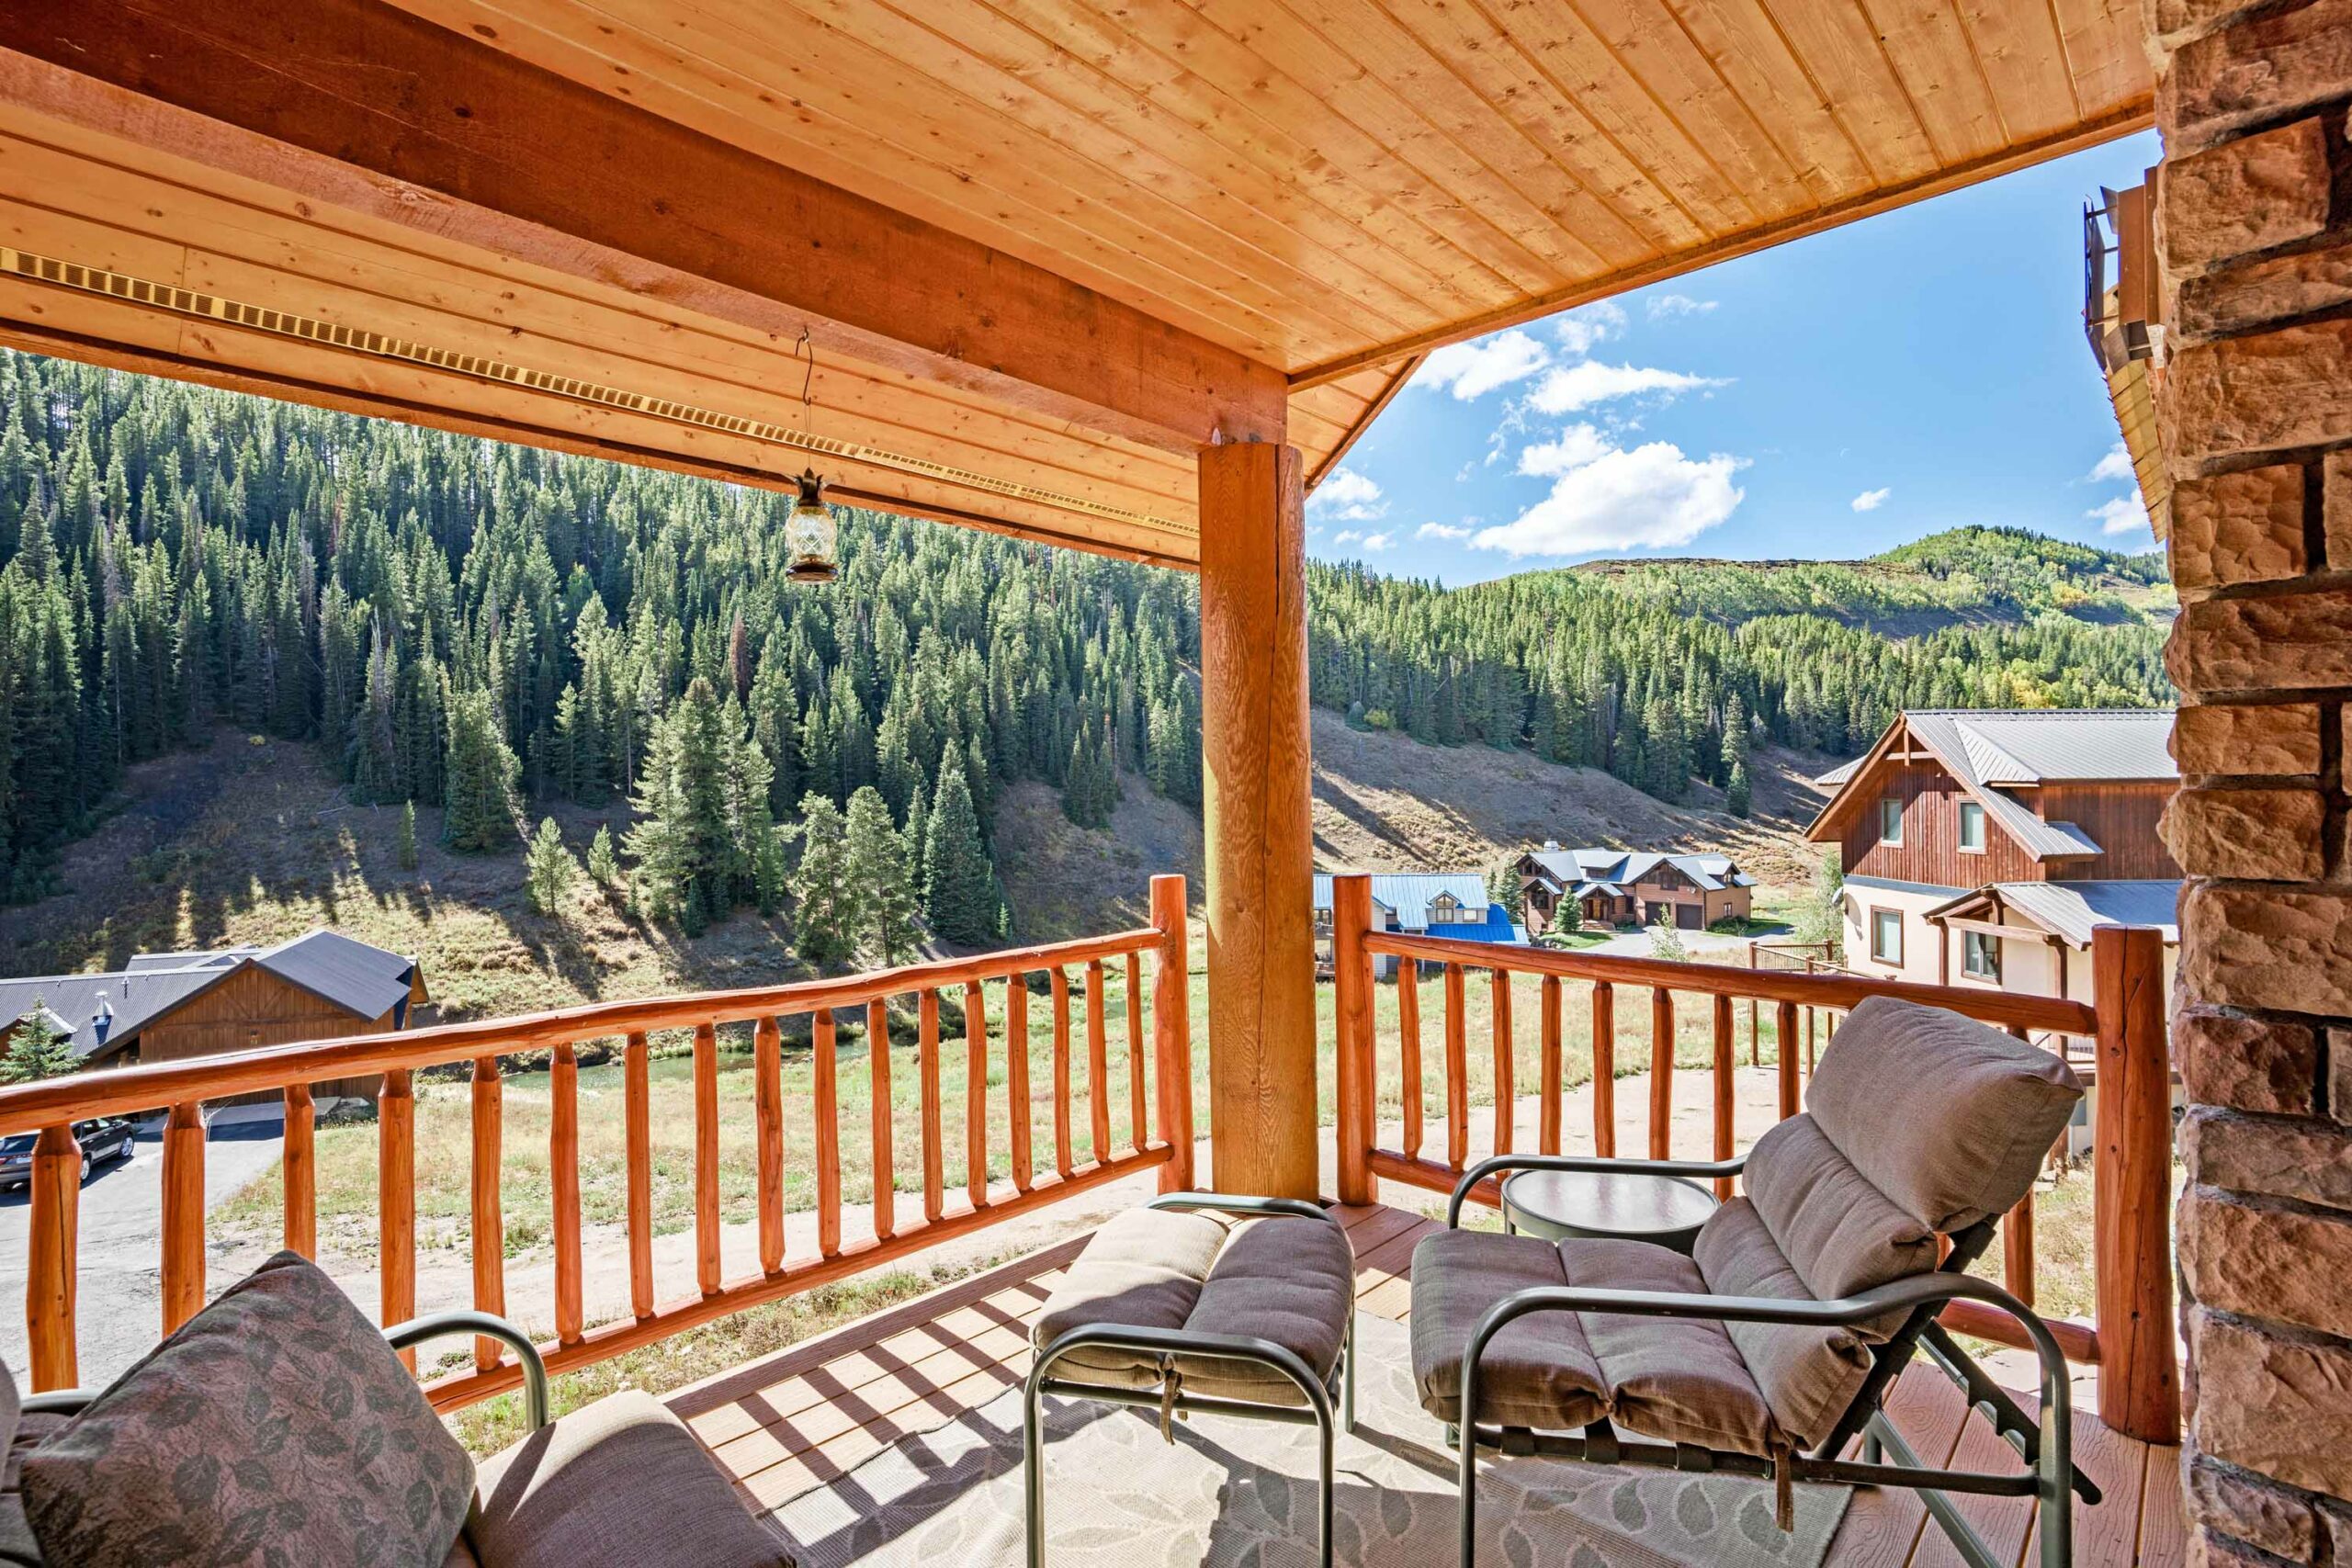 45 Creek Cove Crested Butte, CO - Primary Bedroom Covered Deck